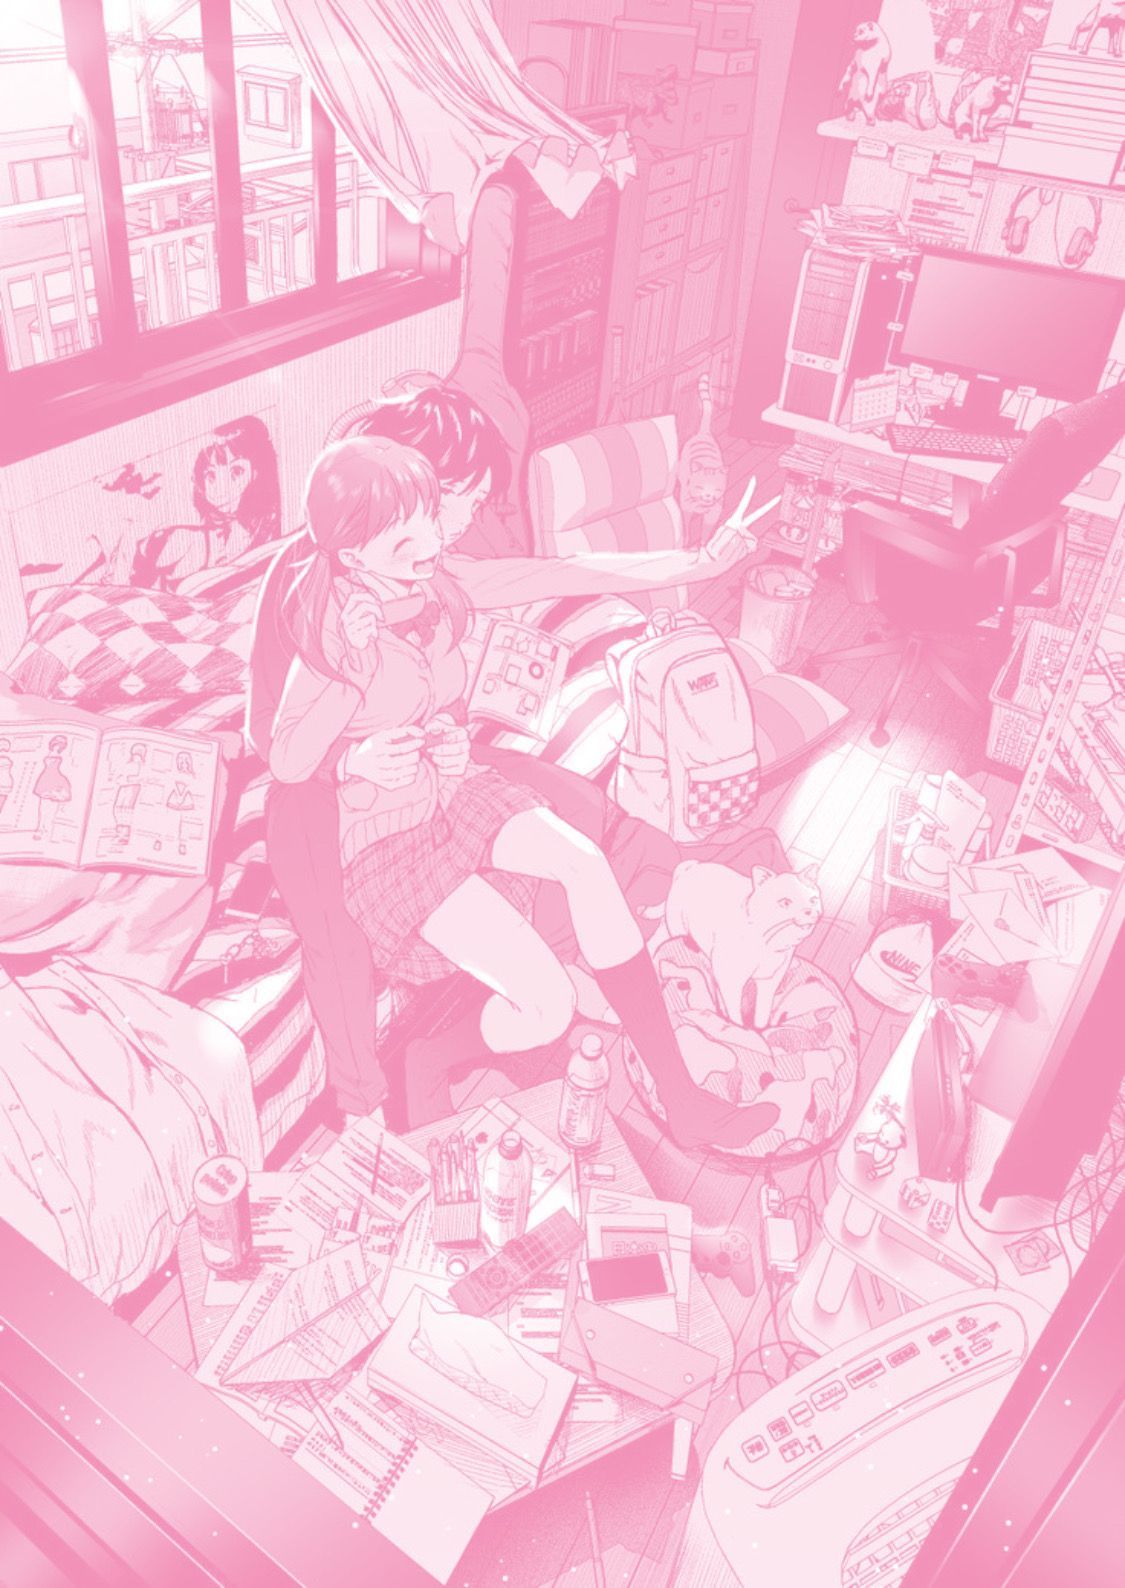 A pink-tinted image of a cluttered room with a girl sitting on the floor in the center. - Pink anime